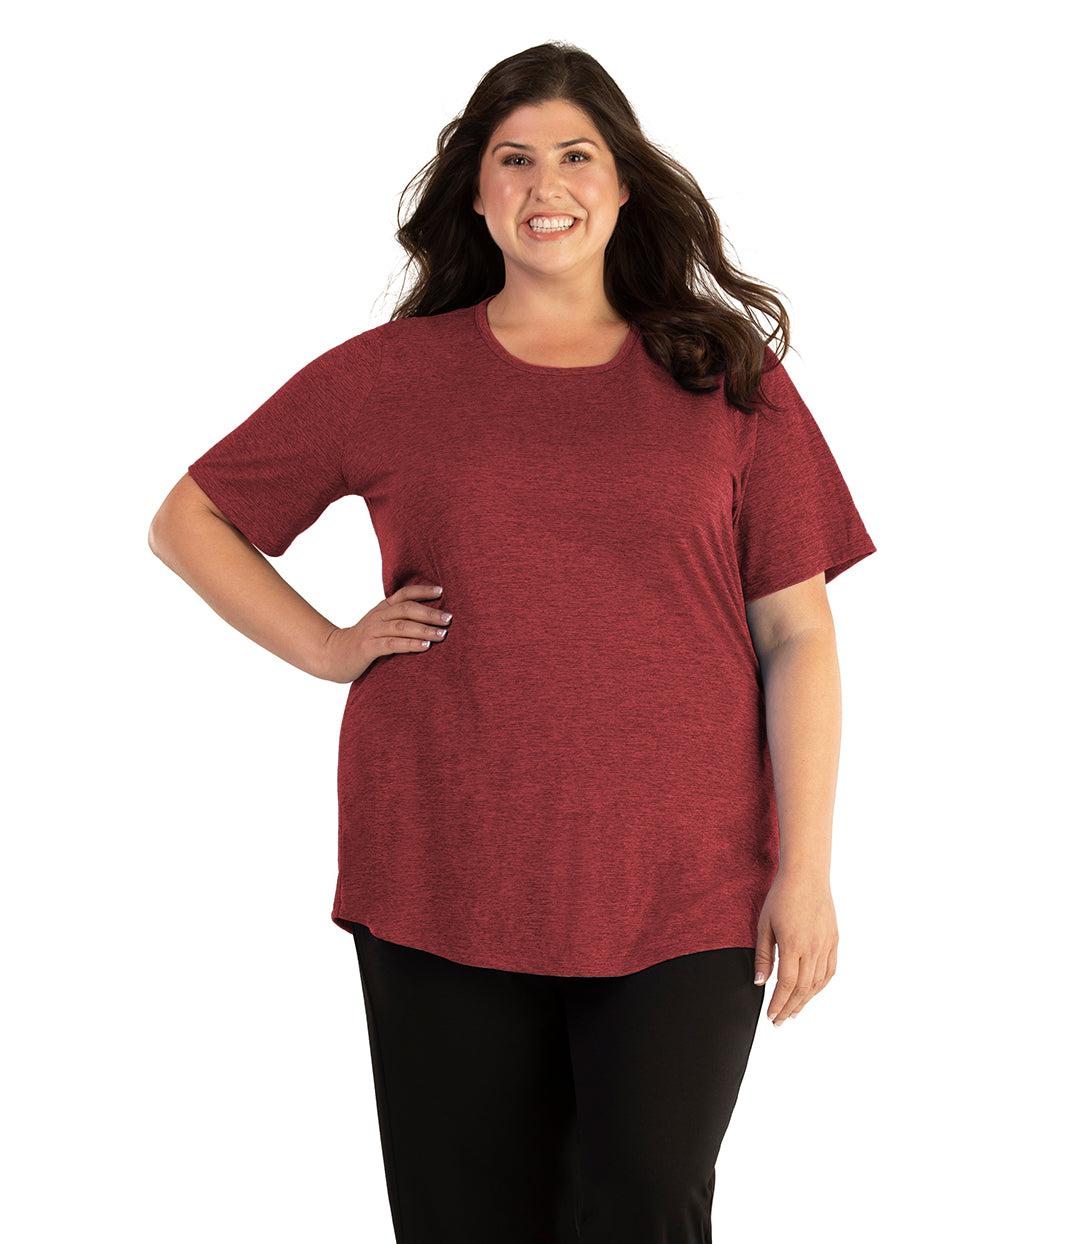 Plus size woman, facing front, wearing JunoActive plus size QuikLite Scoop Neck Short Sleeve top in the color Heather Garnet Red. She is wearing JunoActive Plus Size Leggings in the color black. 